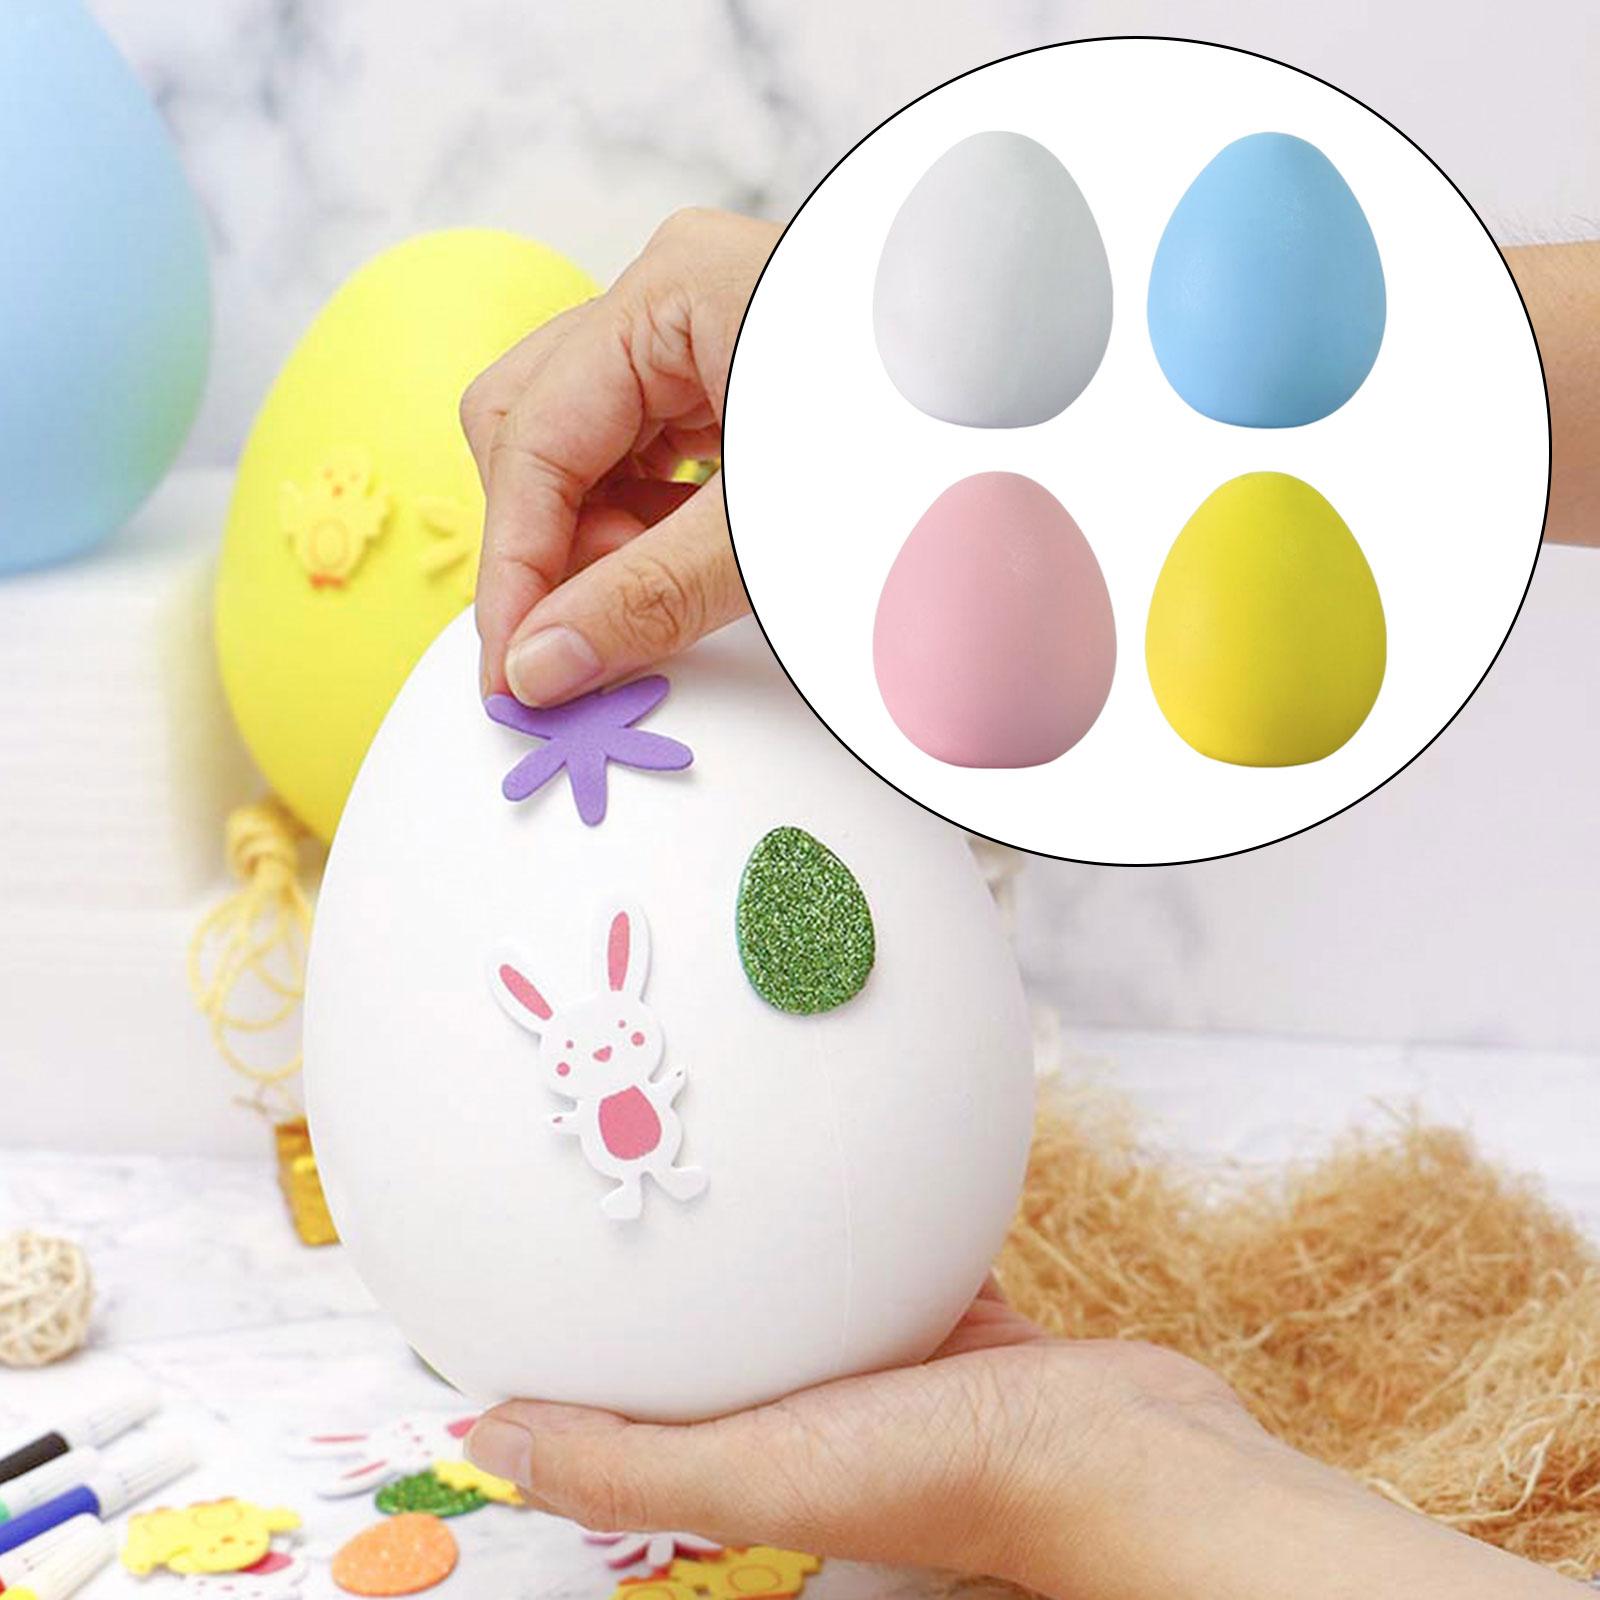 4Pcs Easter Eggs Colorful Easter Eggs for Craft DIY School Projects Easter